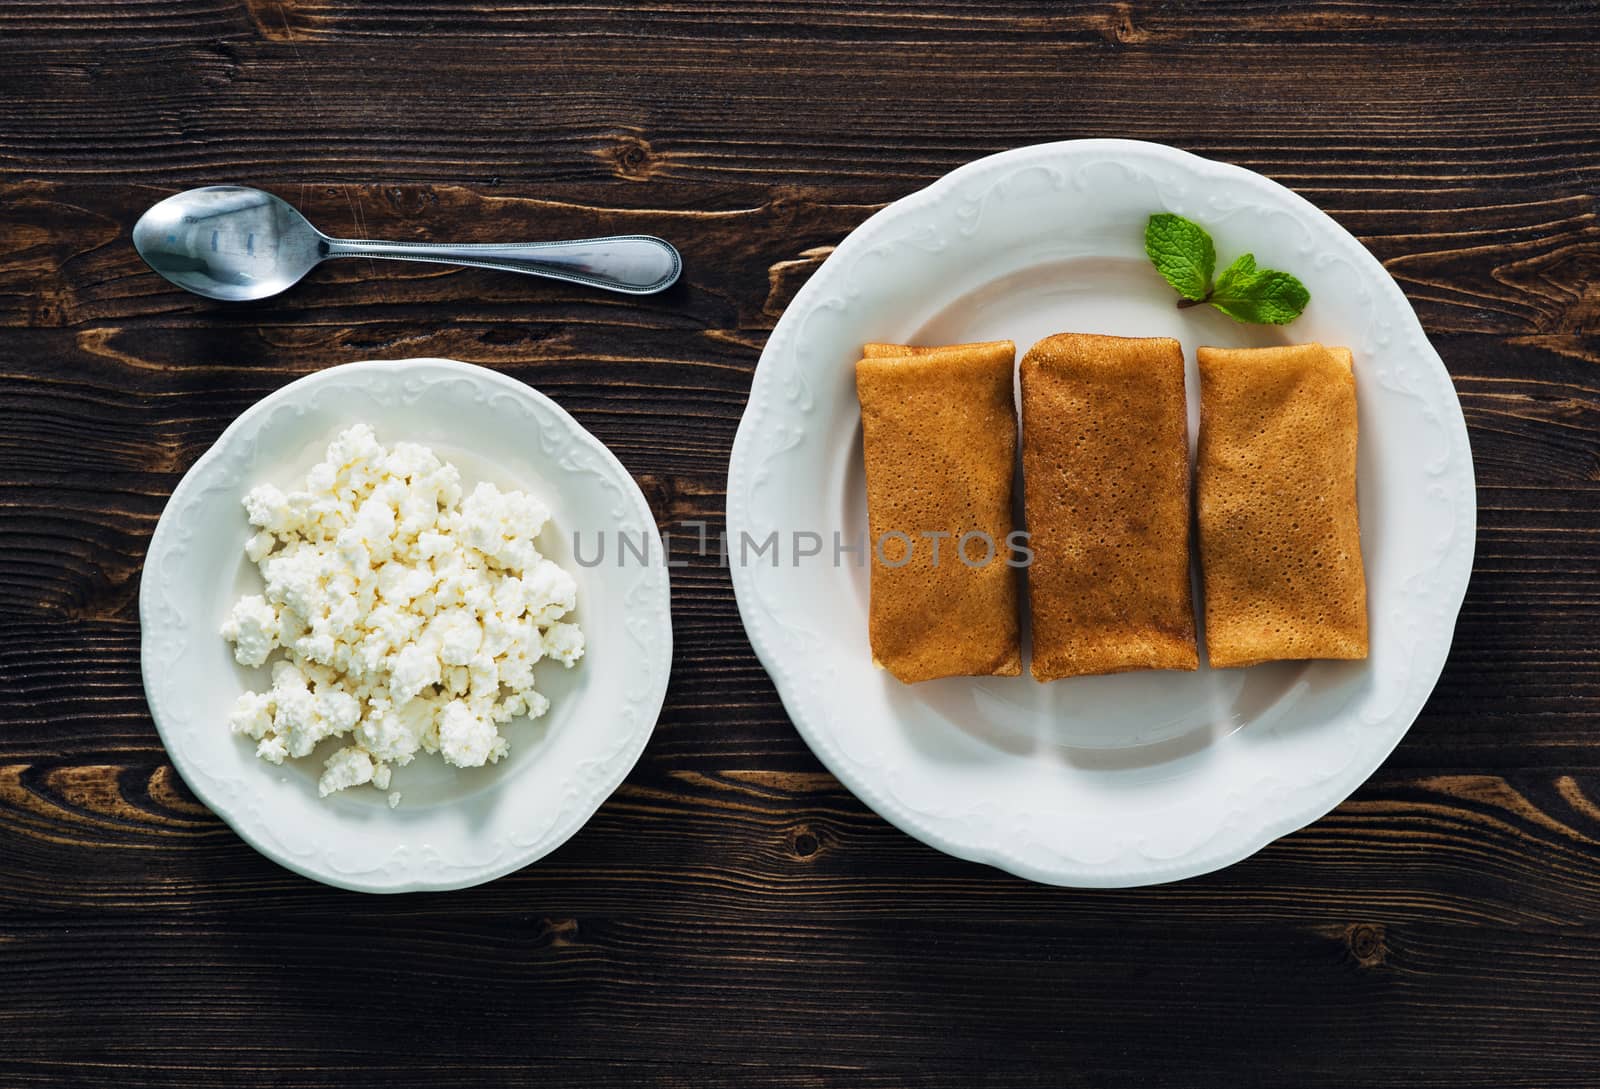 Stuffed pancakes with cottage cheese by kzen